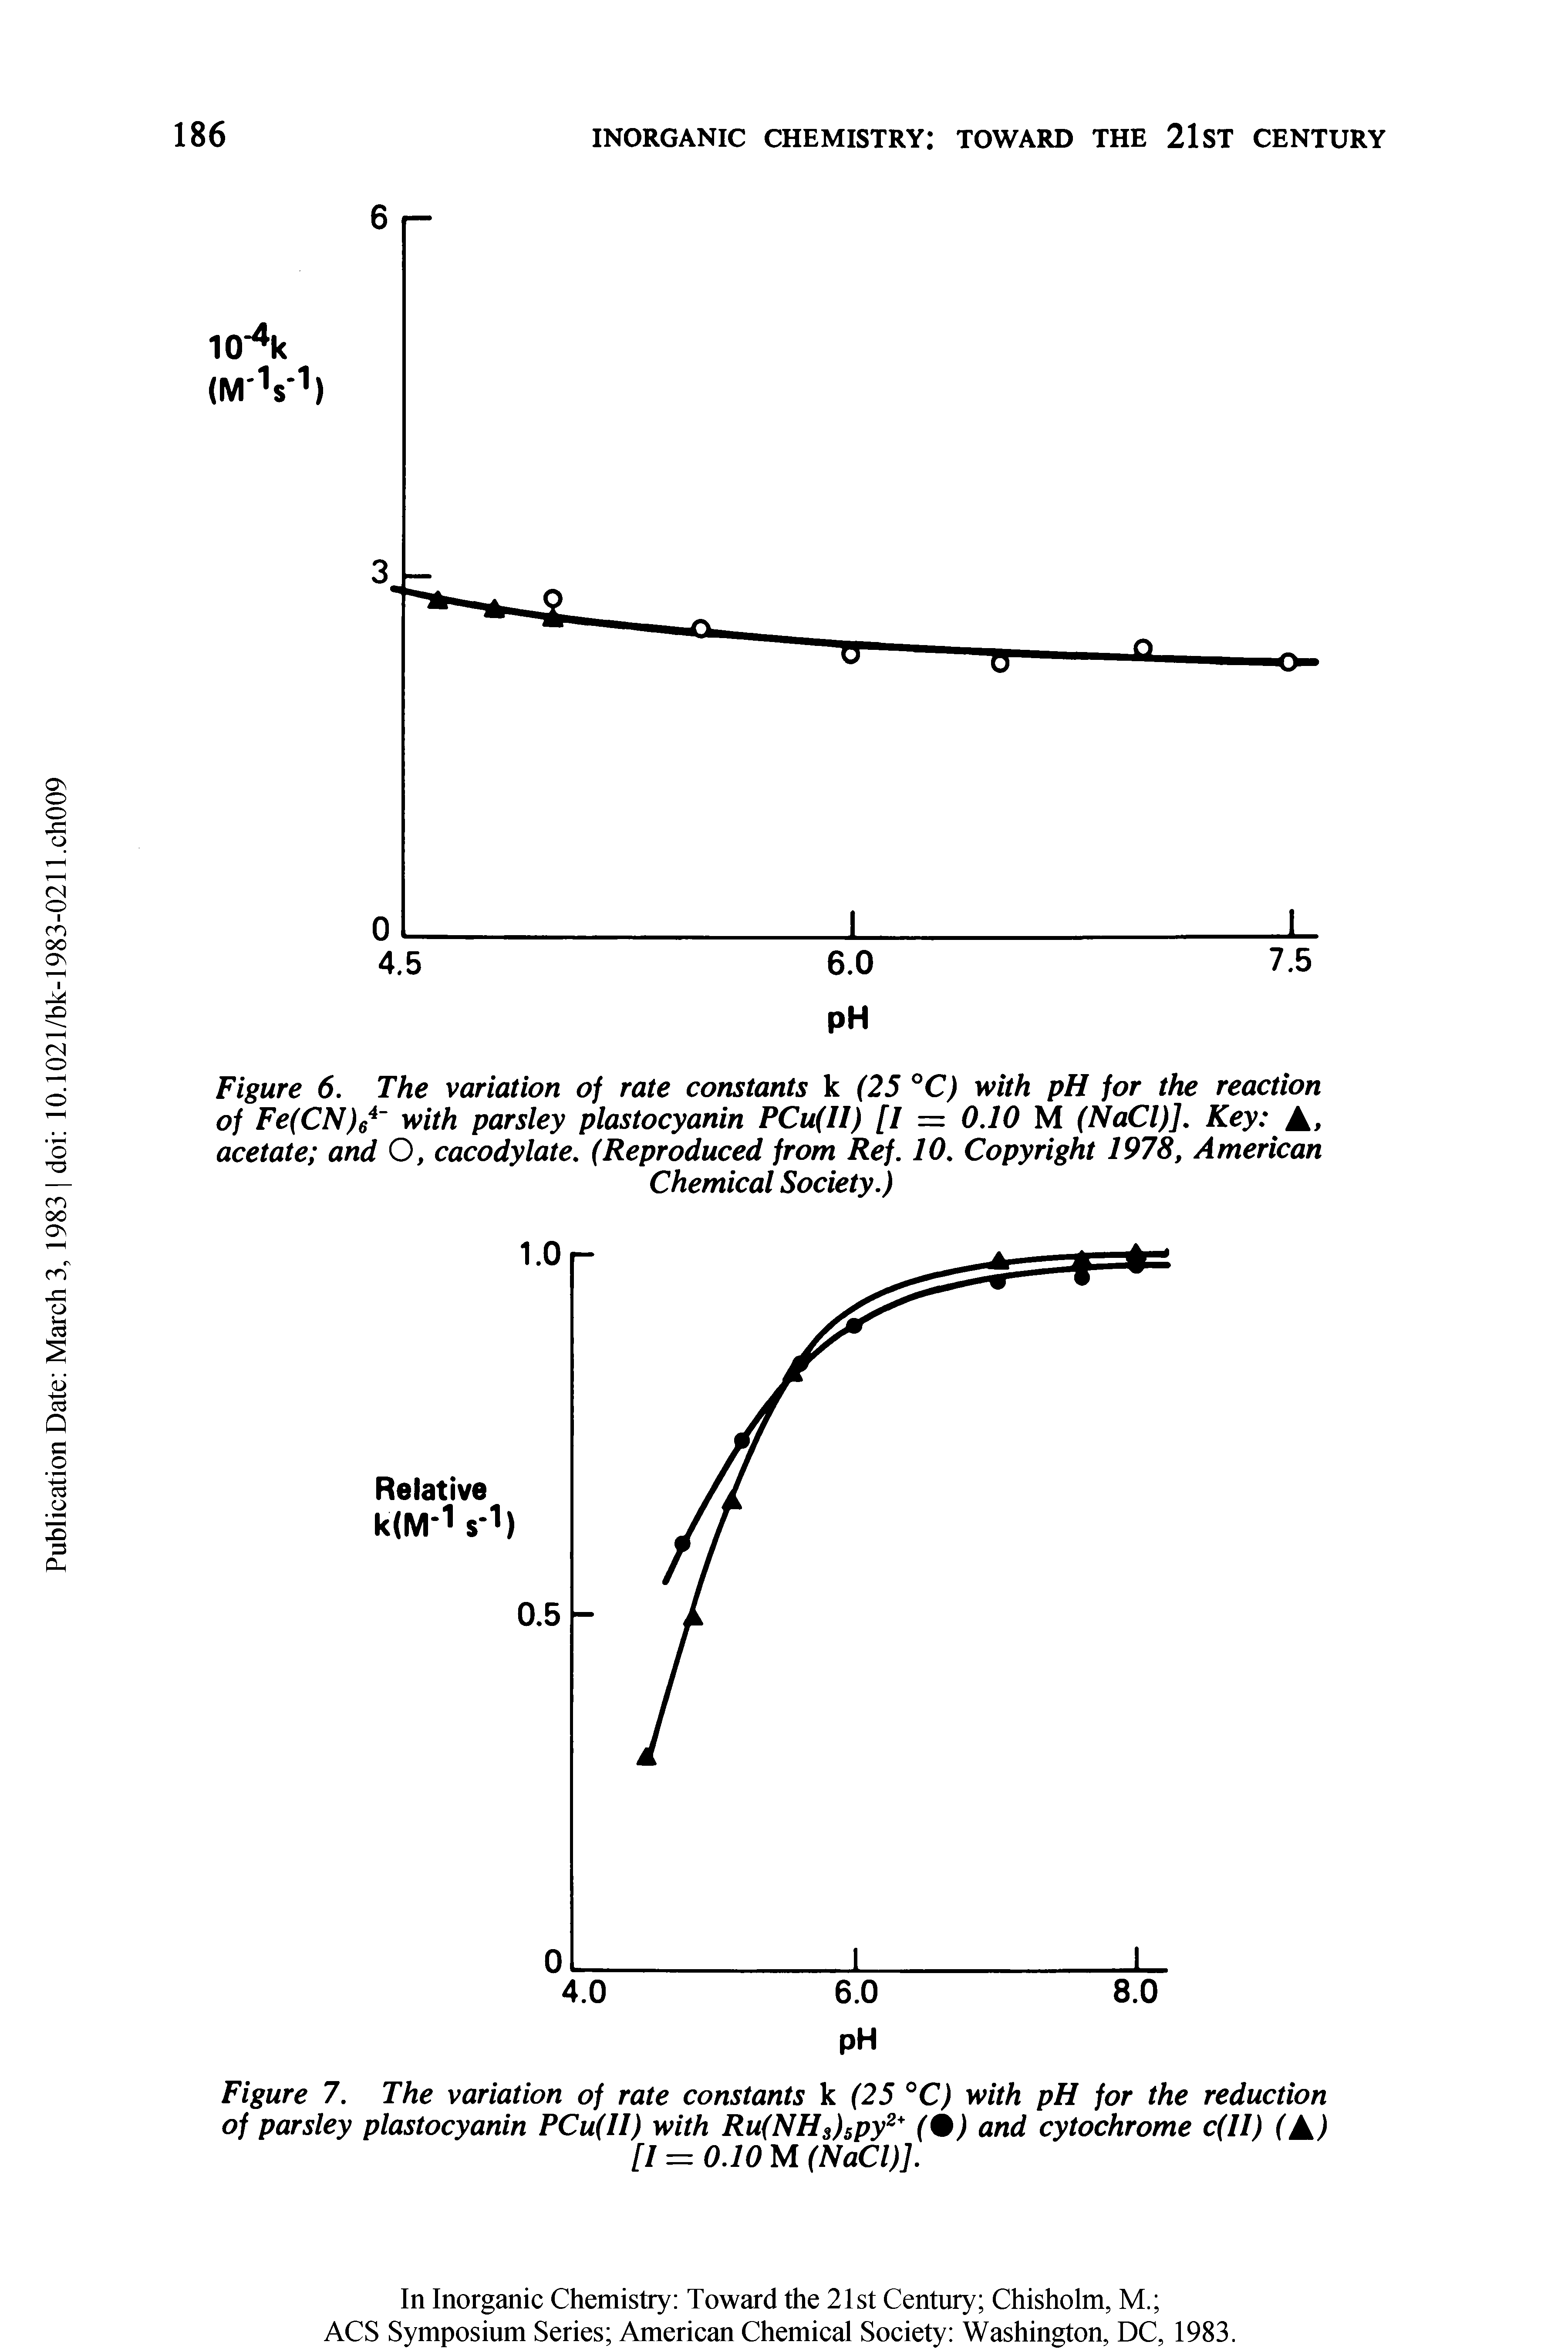 Figure 6. The variation of rate constants k (25 °C) with pH for the reaction of Fe(CN)64 with parsley plastocyanin PCu(II) [I = 0.10 M (NaCI)]. Key A, acetate and O, cacodylate. (Reproduced from Ref. 10. Copyright 1978, American...